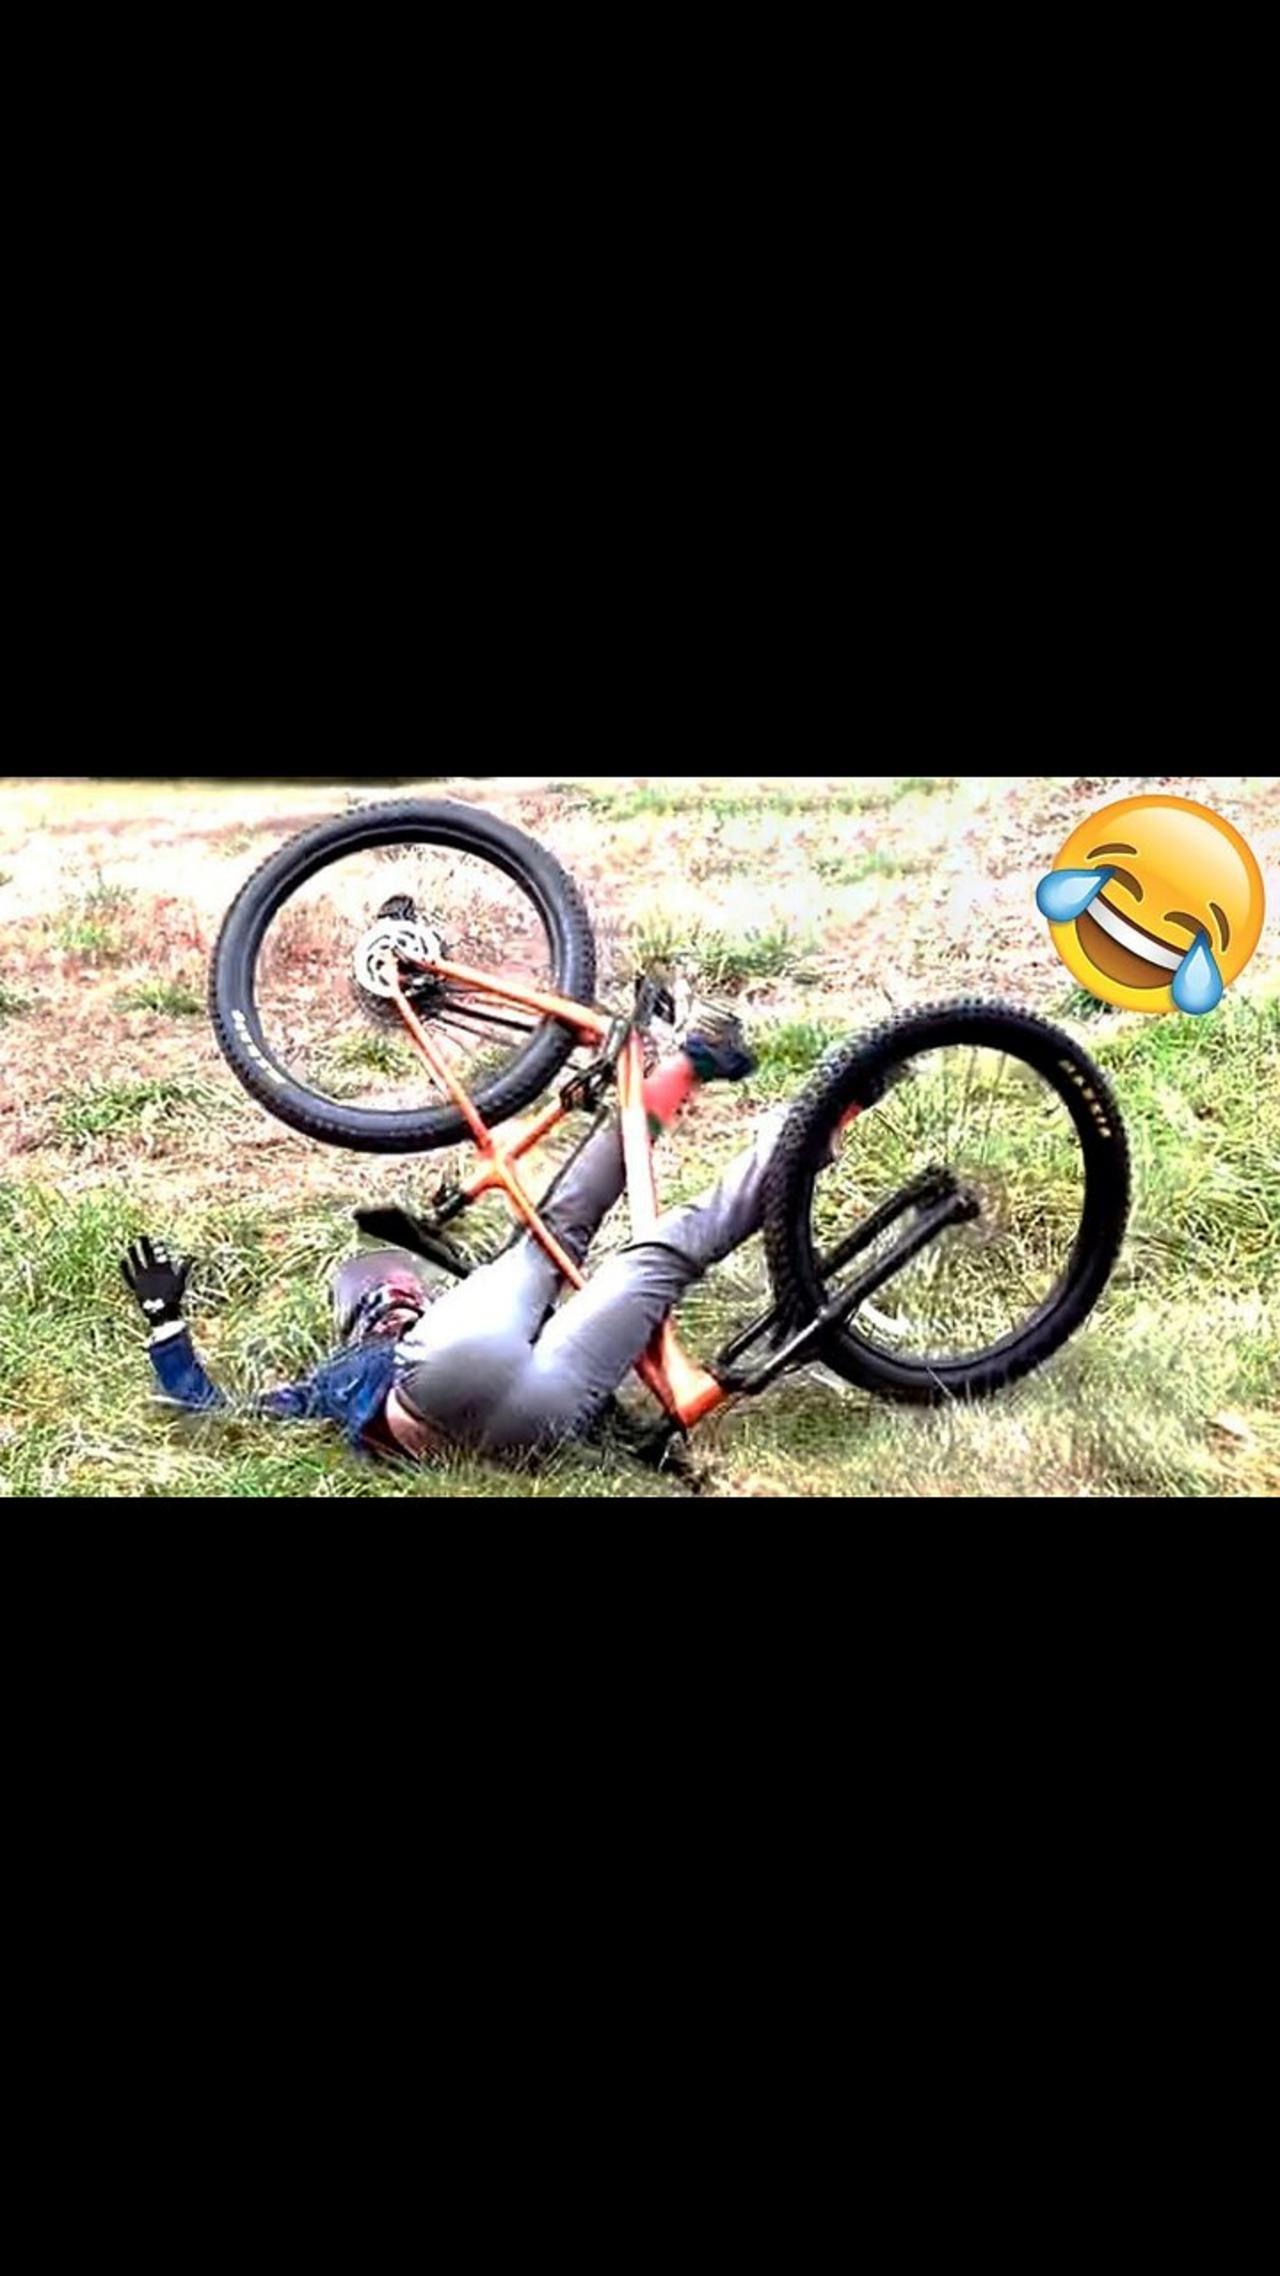 The end 😂😂😂 very funny 🤣  fails funny  #funny #failsarmy #shorts #viral (25)